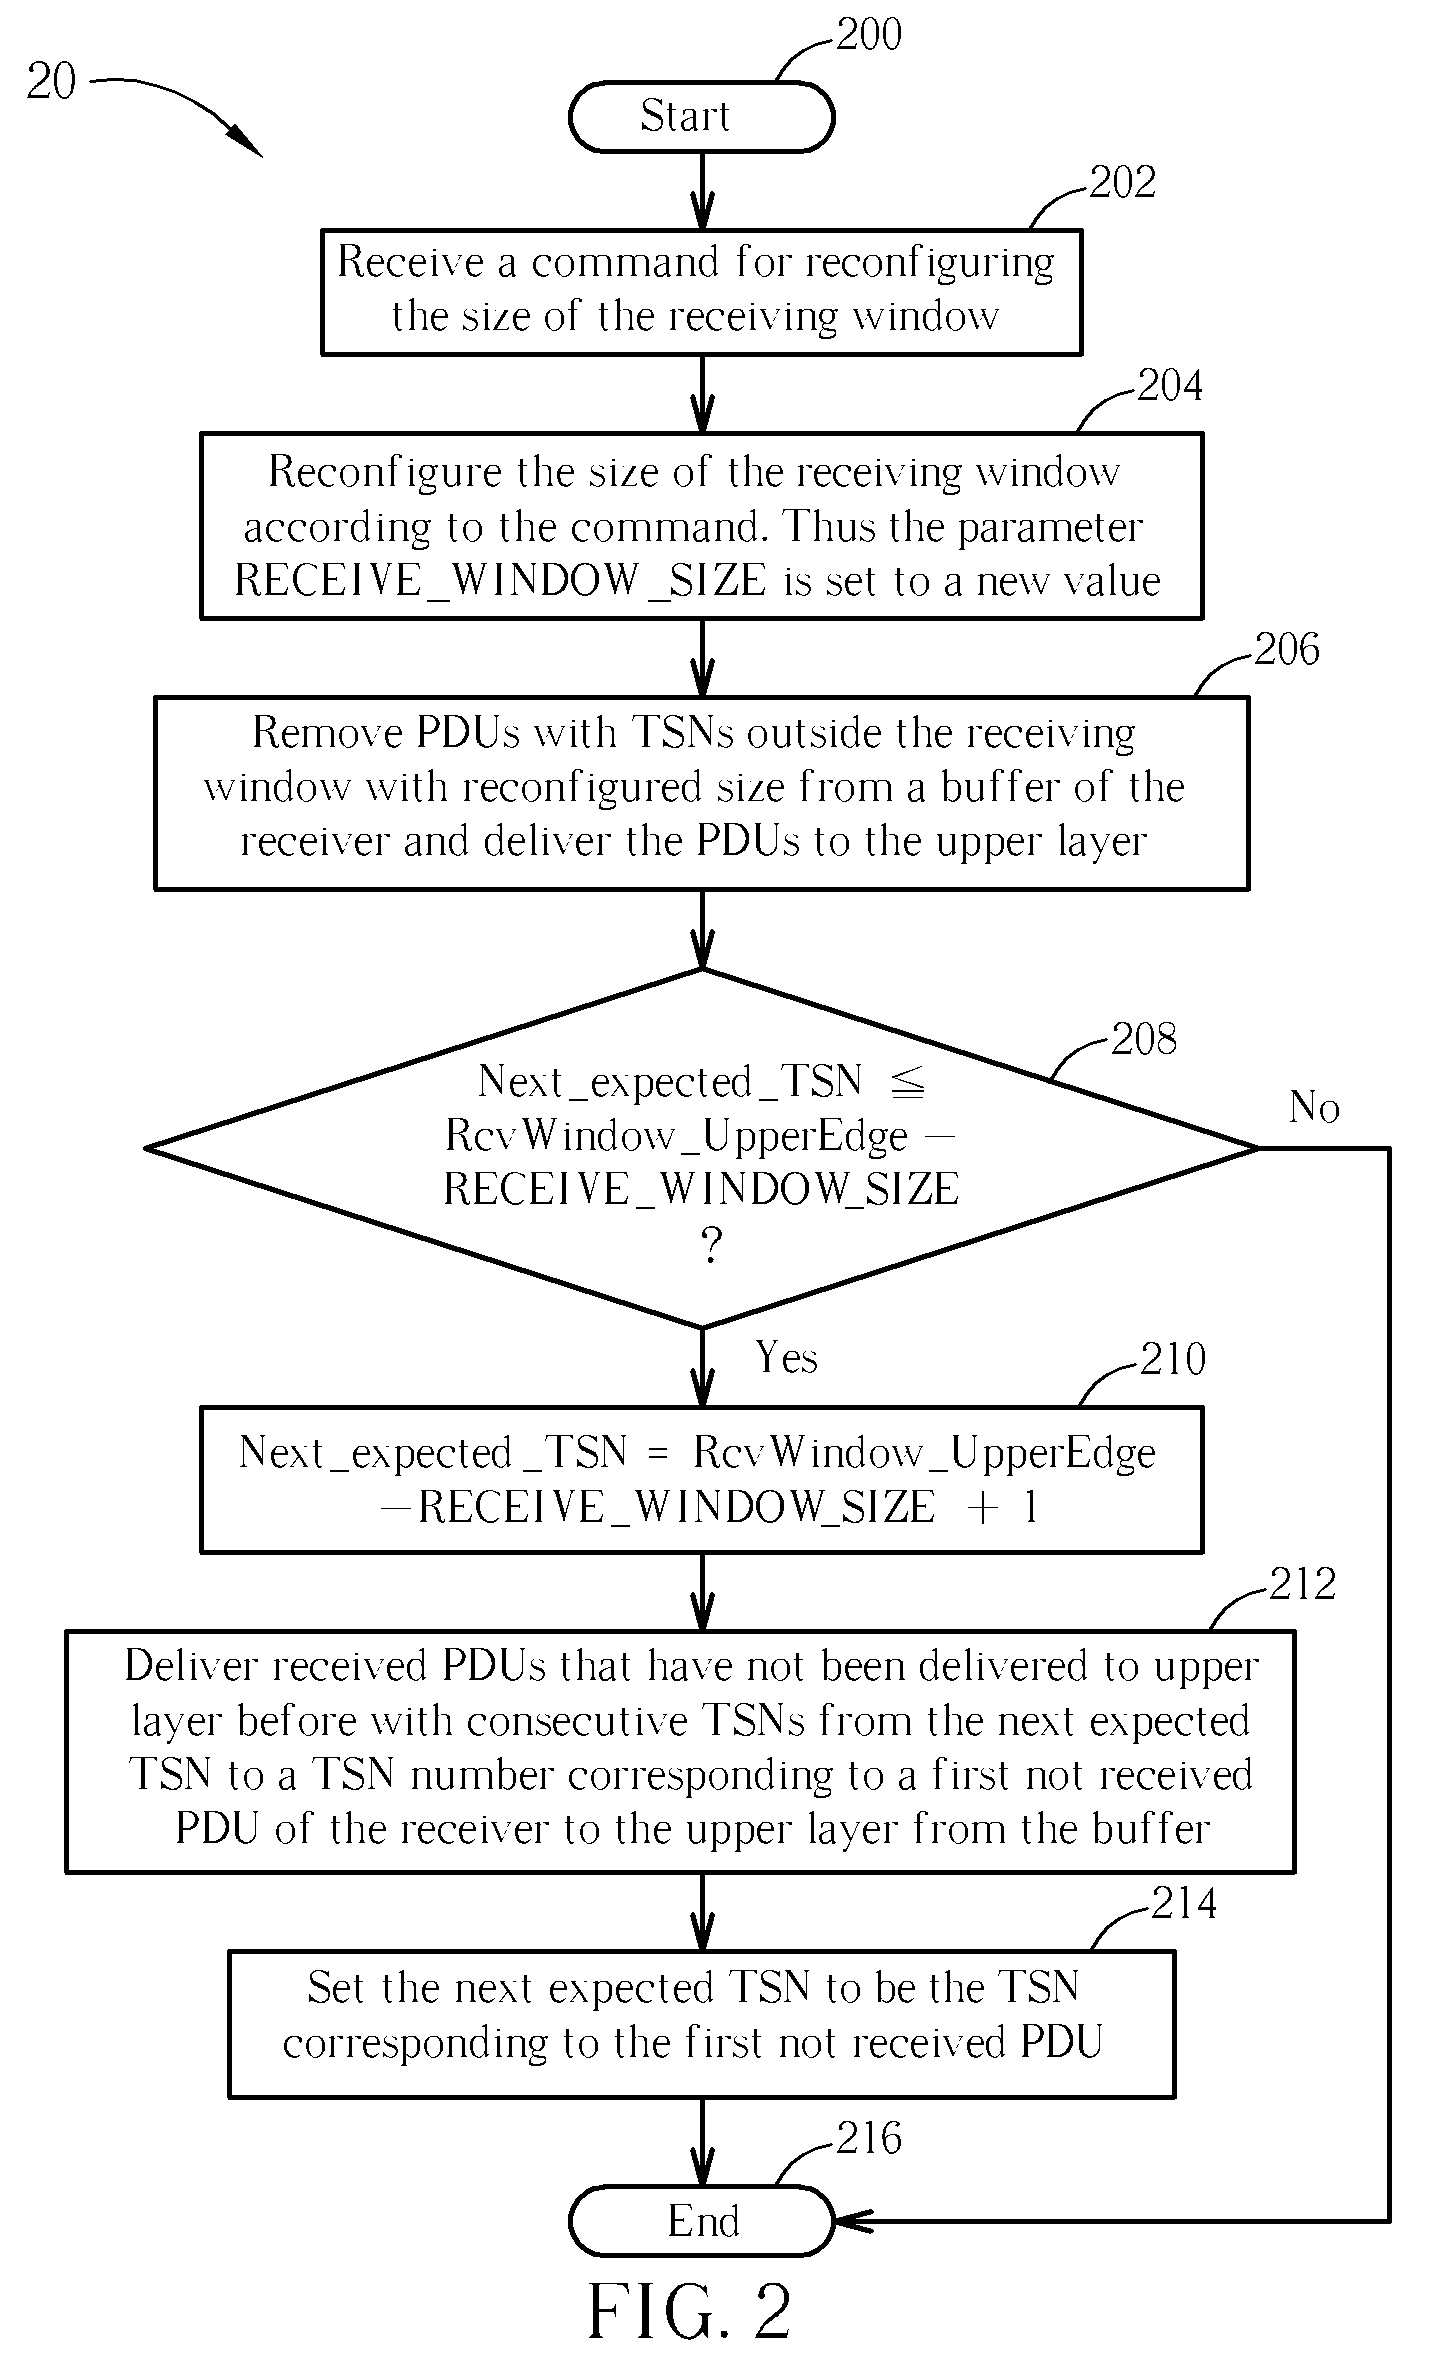 Method and related apparatus for reconfiguring size of a receiving window in a communications system